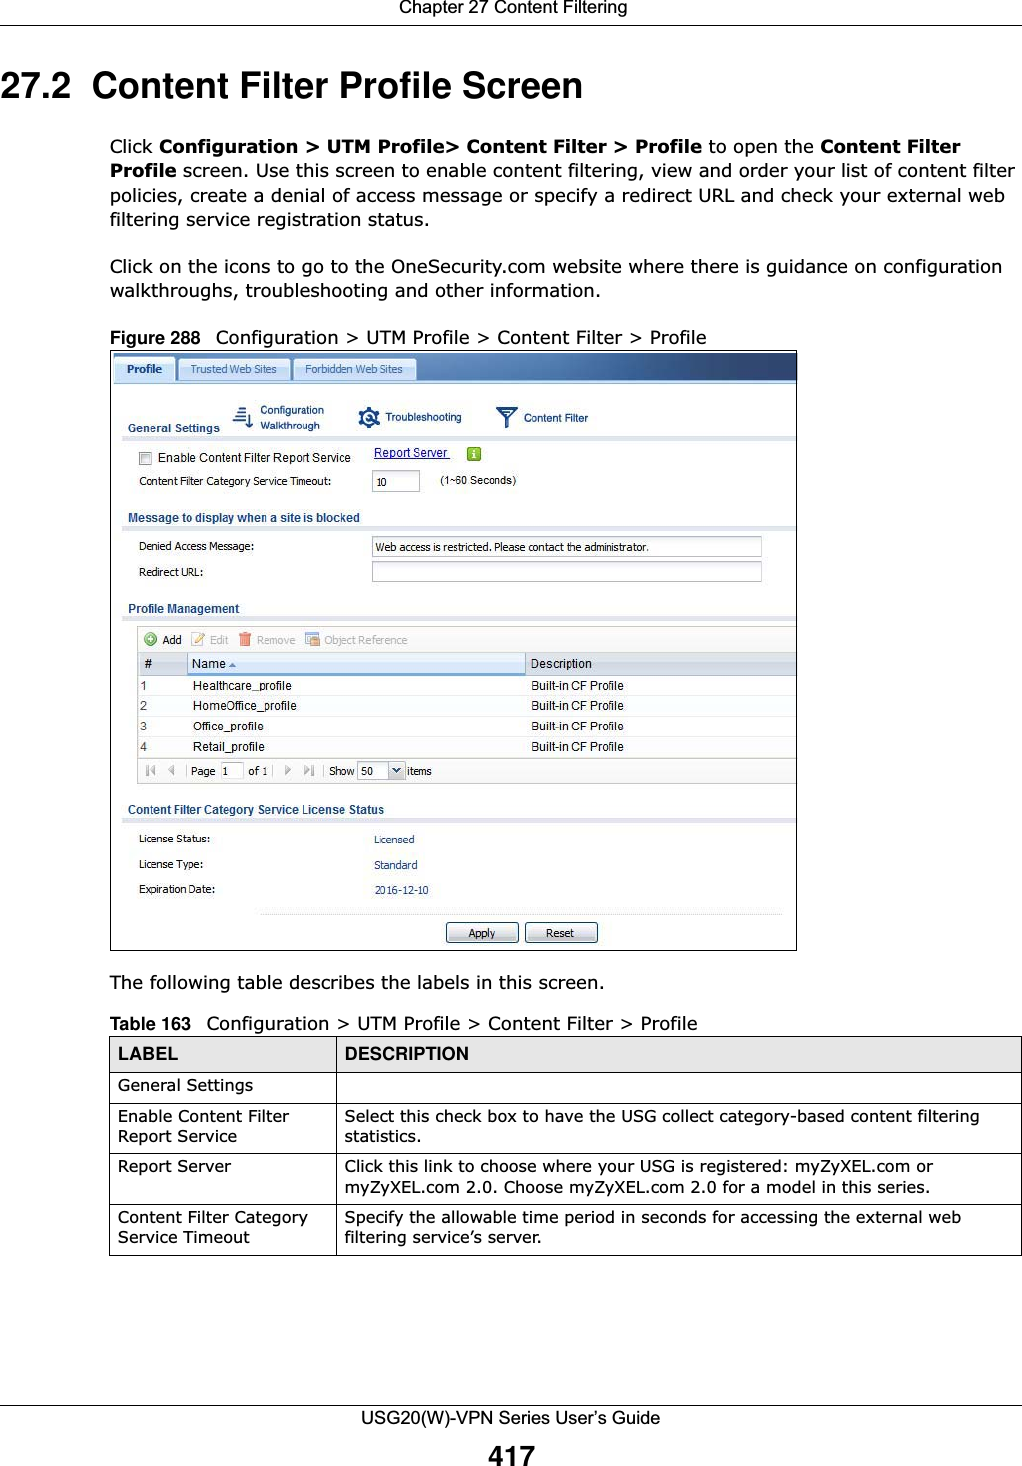  Chapter 27 Content FilteringUSG20(W)-VPN Series User’s Guide41727.2  Content Filter Profile ScreenClick Configuration &gt; UTM Profile&gt; Content Filter &gt; Profile to open the Content Filter Profile screen. Use this screen to enable content filtering, view and order your list of content filter policies, create a denial of access message or specify a redirect URL and check your external web filtering service registration status. Click on the icons to go to the OneSecurity.com website where there is guidance on configuration walkthroughs, troubleshooting and other information.Figure 288   Configuration &gt; UTM Profile &gt; Content Filter &gt; ProfileThe following table describes the labels in this screen.  Table 163   Configuration &gt; UTM Profile &gt; Content Filter &gt; ProfileLABEL DESCRIPTIONGeneral SettingsEnable Content Filter Report ServiceSelect this check box to have the USG collect category-based content filtering statistics. Report Server Click this link to choose where your USG is registered: myZyXEL.com or myZyXEL.com 2.0. Choose myZyXEL.com 2.0 for a model in this series.Content Filter Category Service Timeout Specify the allowable time period in seconds for accessing the external web filtering service’s server.